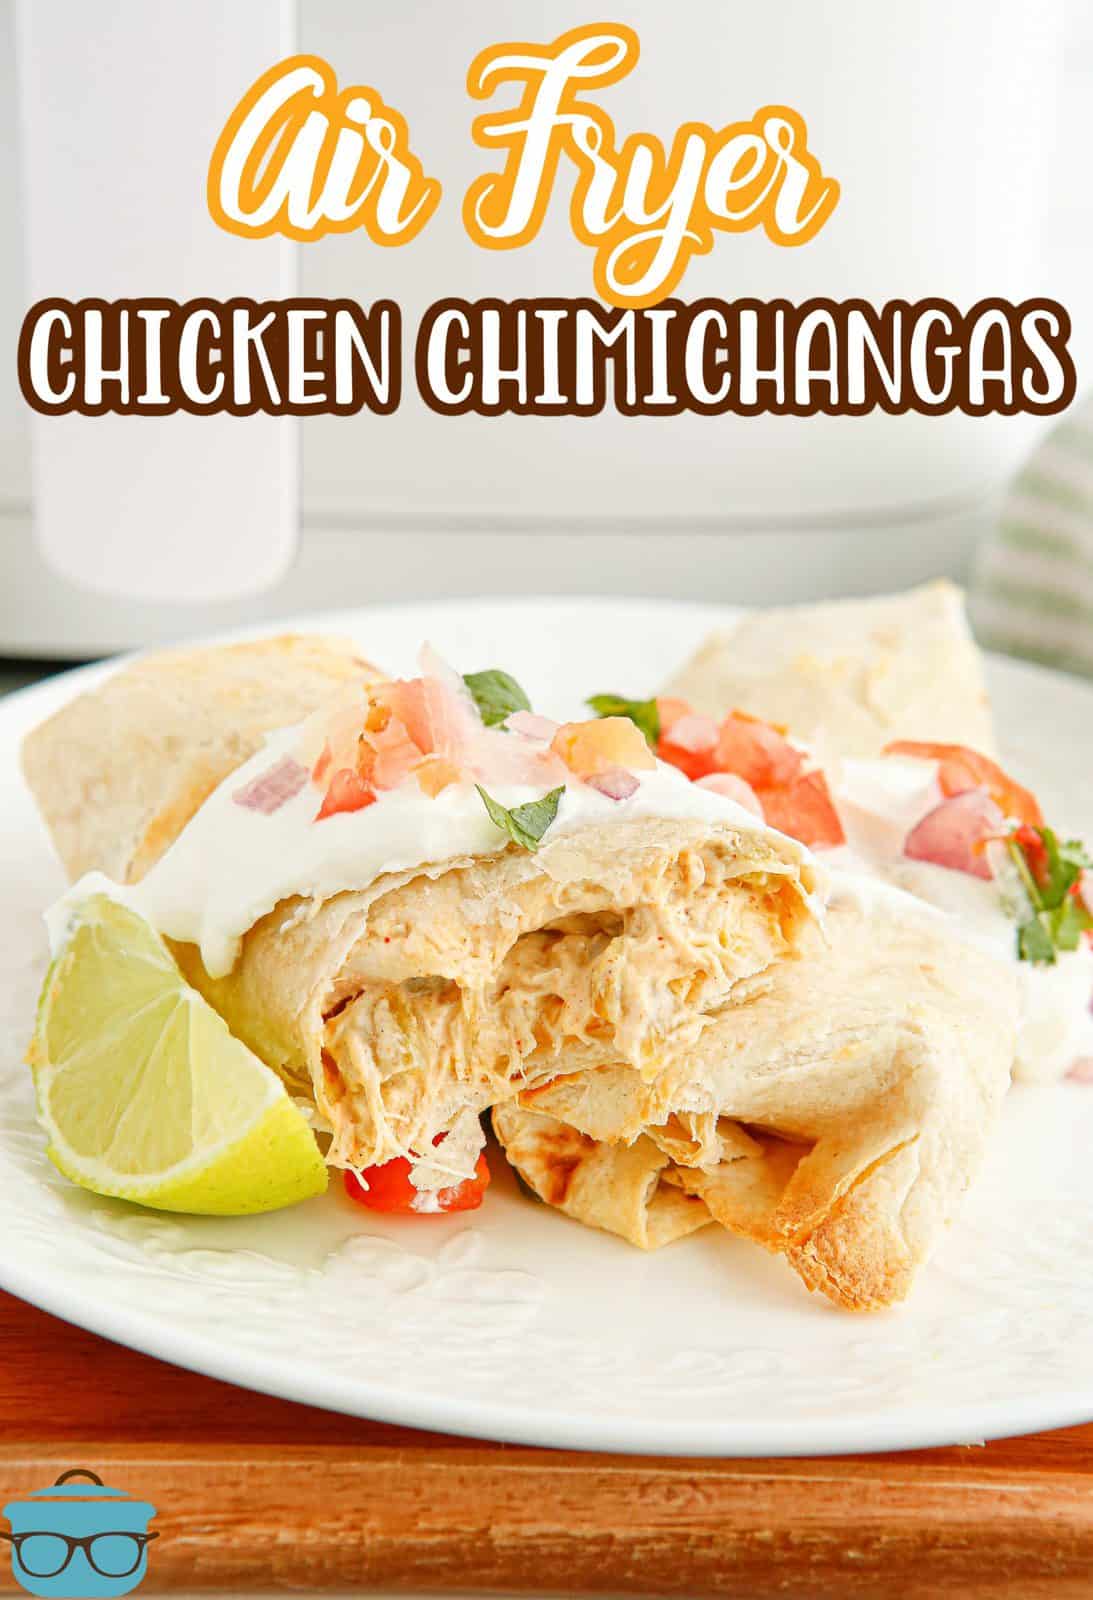 Pinterest image of finished and garnished Air Fryer Chicken Chimichangas cut open showing inside.